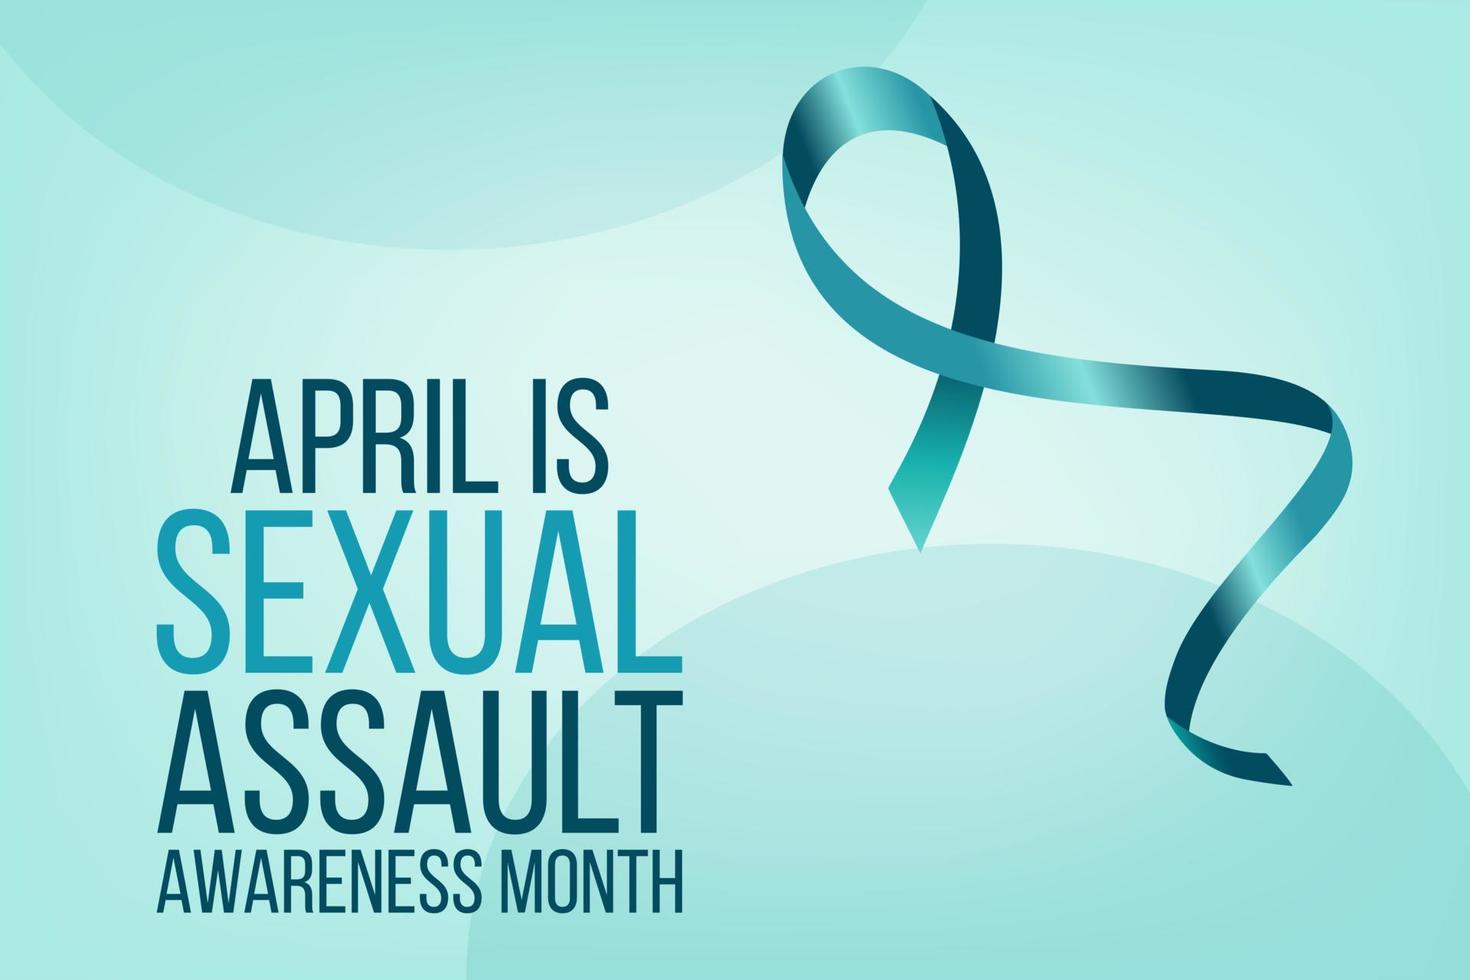 Sexual assault awareness day concept. Vector illustration.